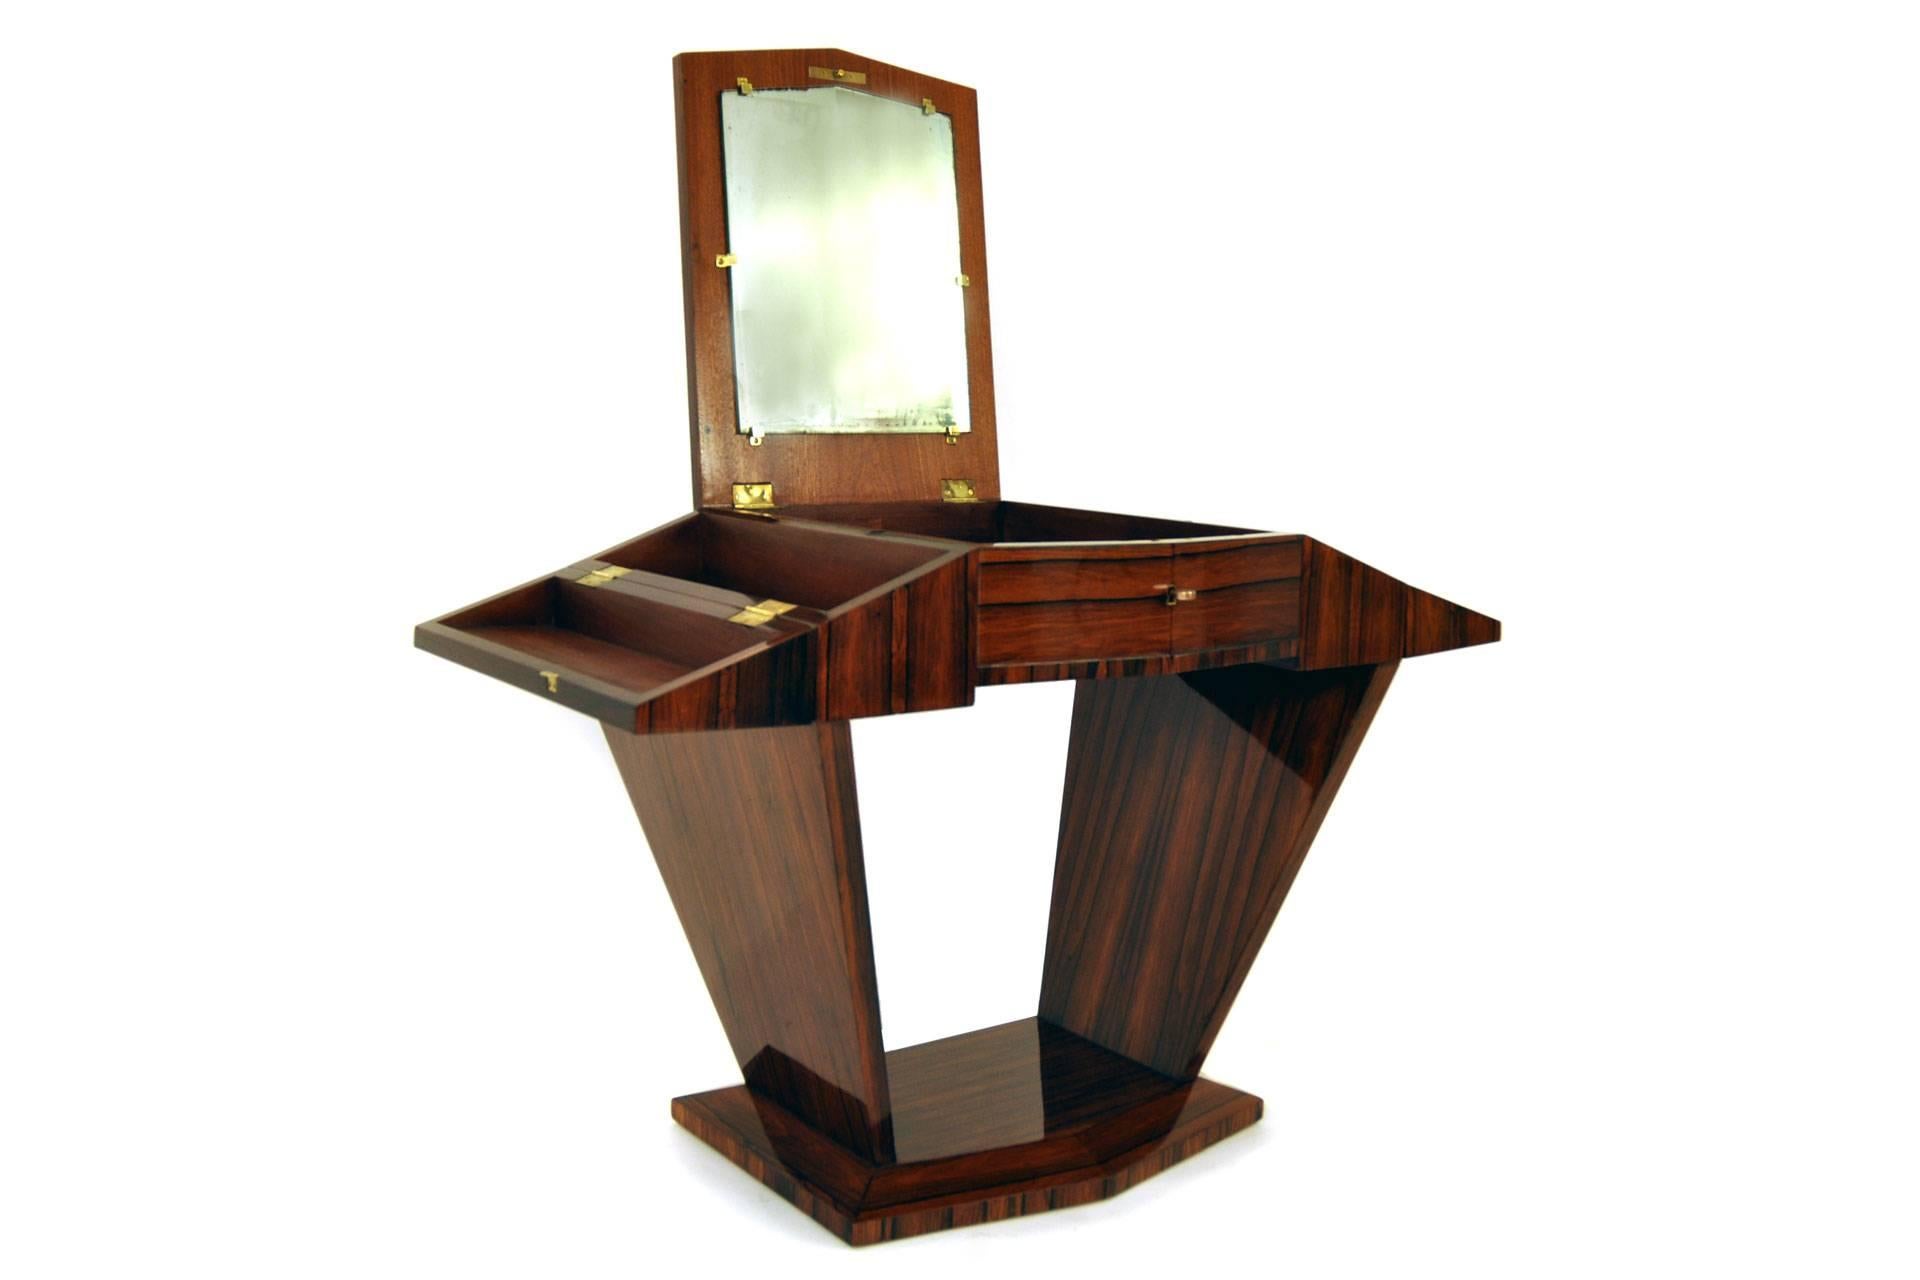 The dressing table was manufactured in France, between 1920-1930. It is made of rosewood and covered with shellac hand polish. The item is also lockable.
(Dimensions when the item is closed: height 70 cm and width 76 cm).